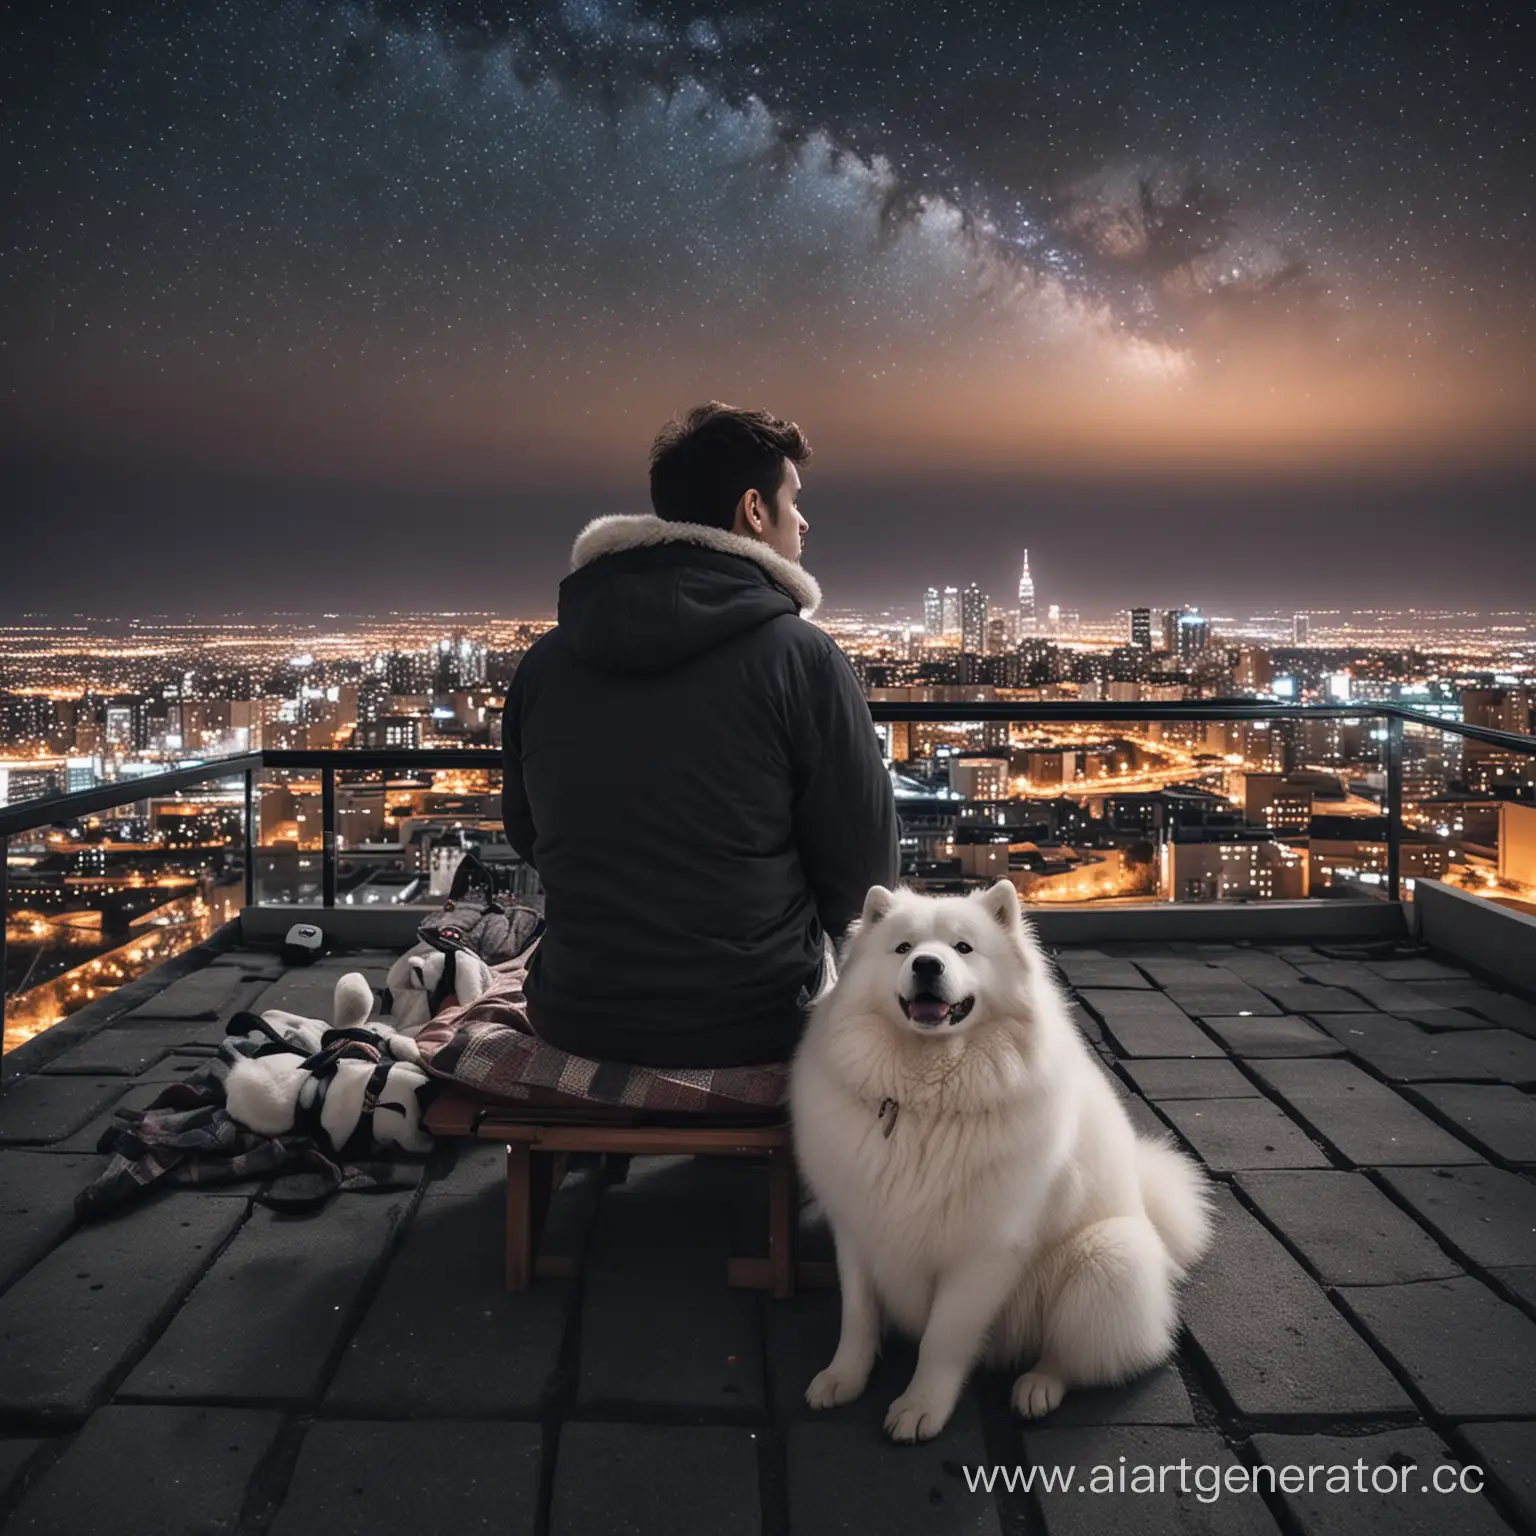 Night-Sky-Gazing-on-Residential-Building-Roof-with-Samoyed-Dog